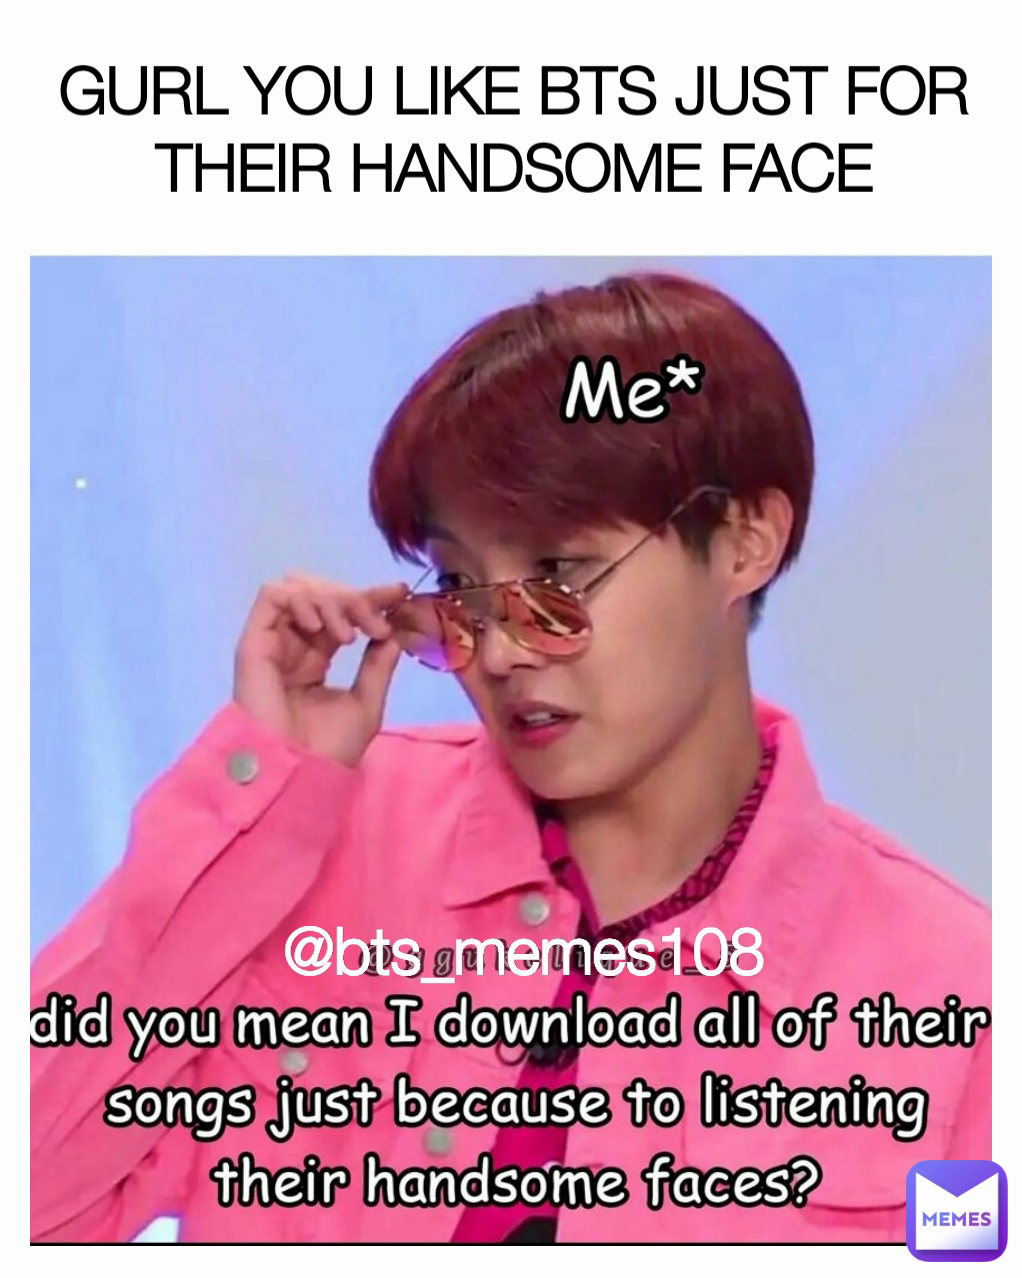 @bts_memes108  GURL YOU LIKE BTS JUST FOR THEIR HANDSOME FACE